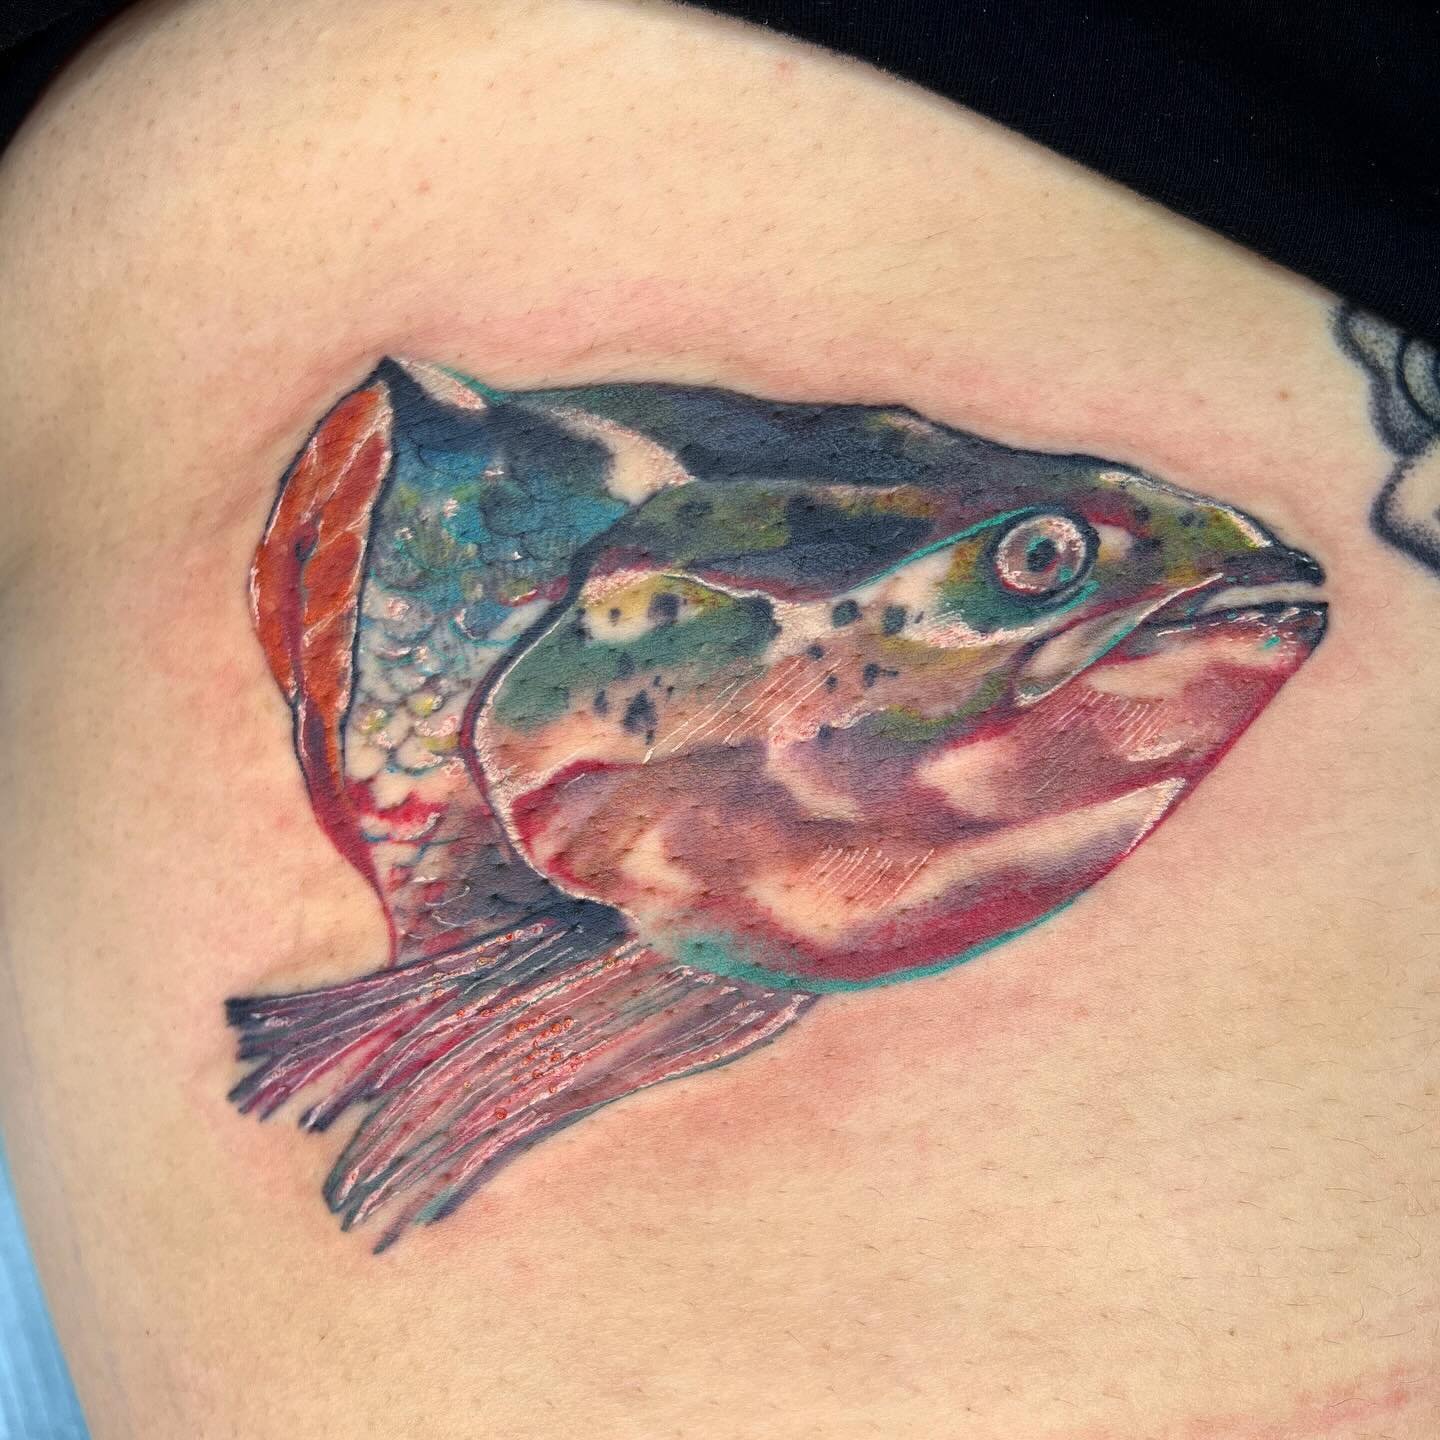 Finished up @soupbasechan fish :3 smoothed out some colours + added detail and highlights :33333

#fishtattoo #watercolortattoo #fishhead #fishermancatchhahahahahha